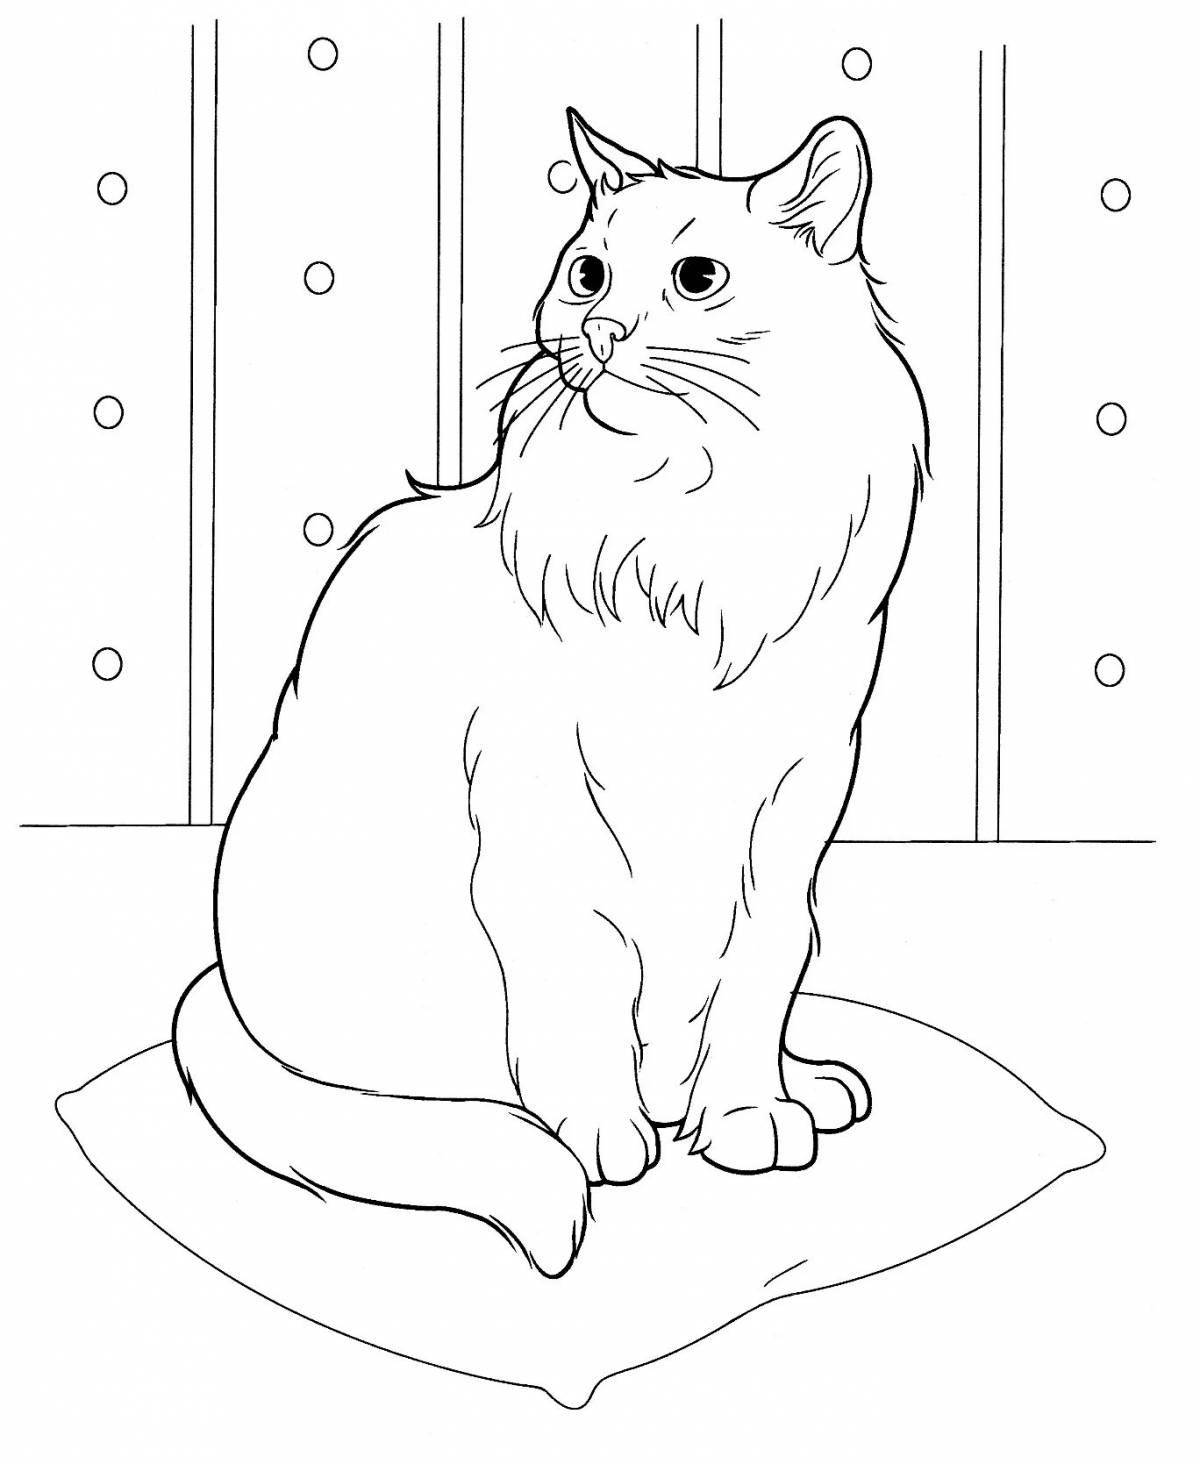 Coloring page mischievous sitting cat